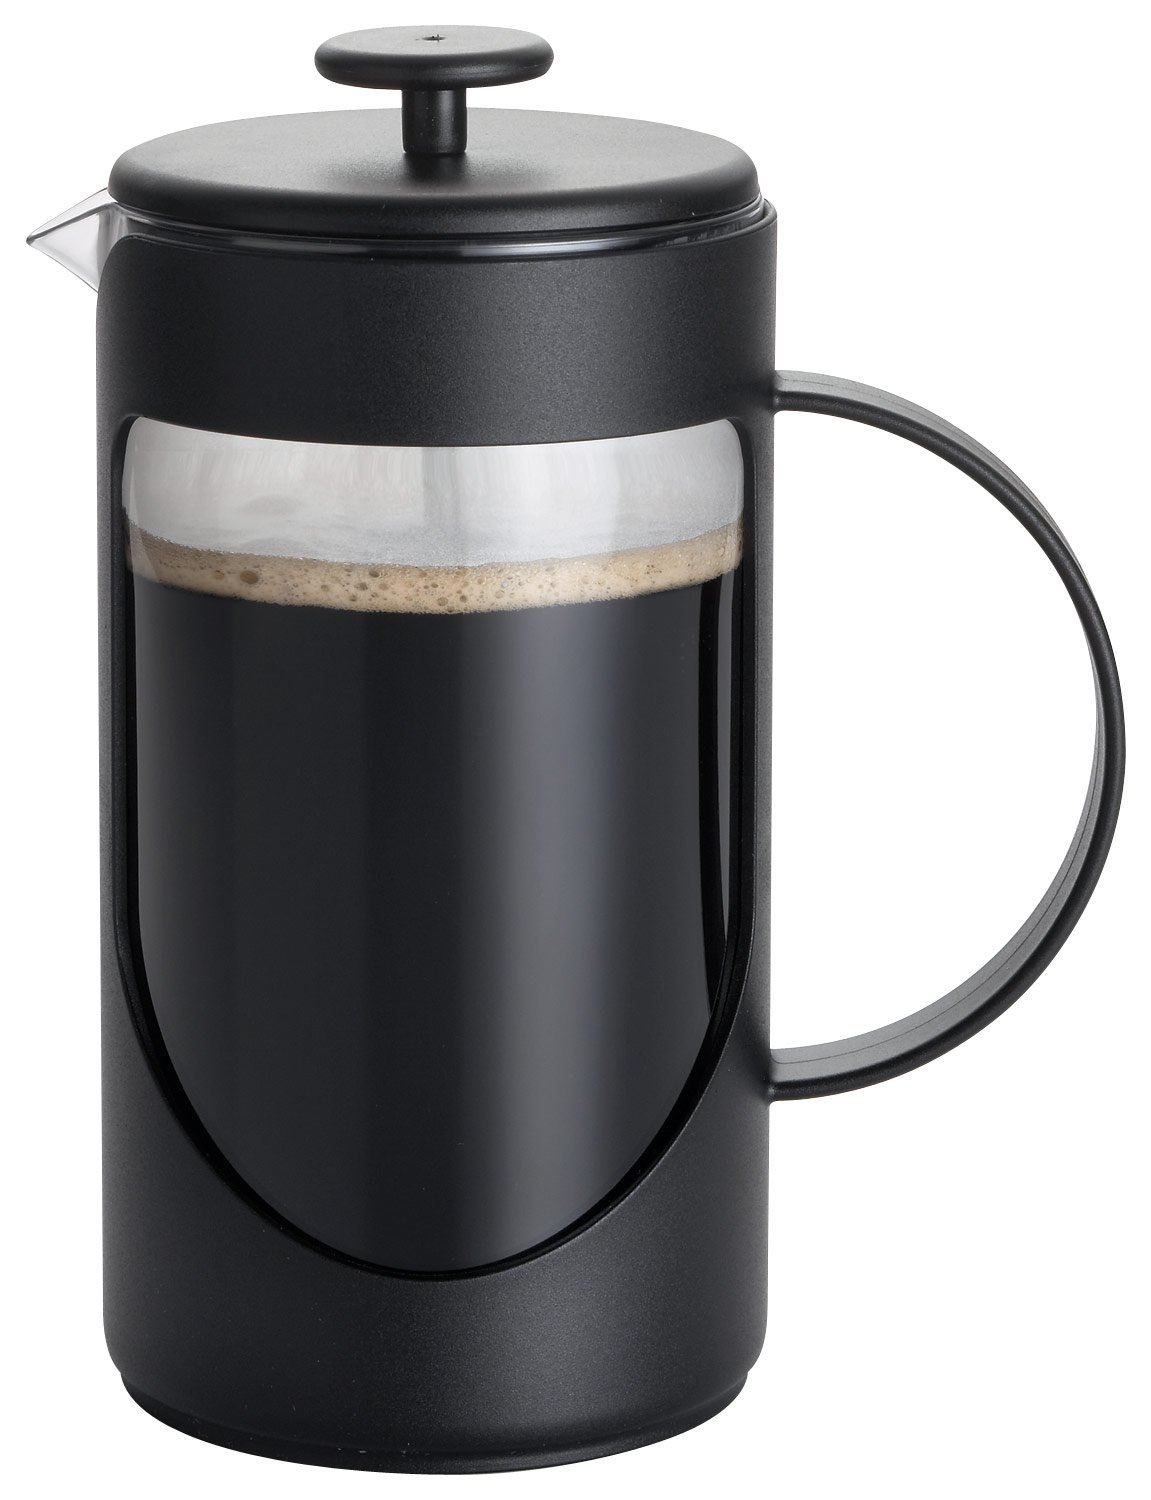 Angle View: Bonjour - Ami-Matin 8-Cup French Press - Black